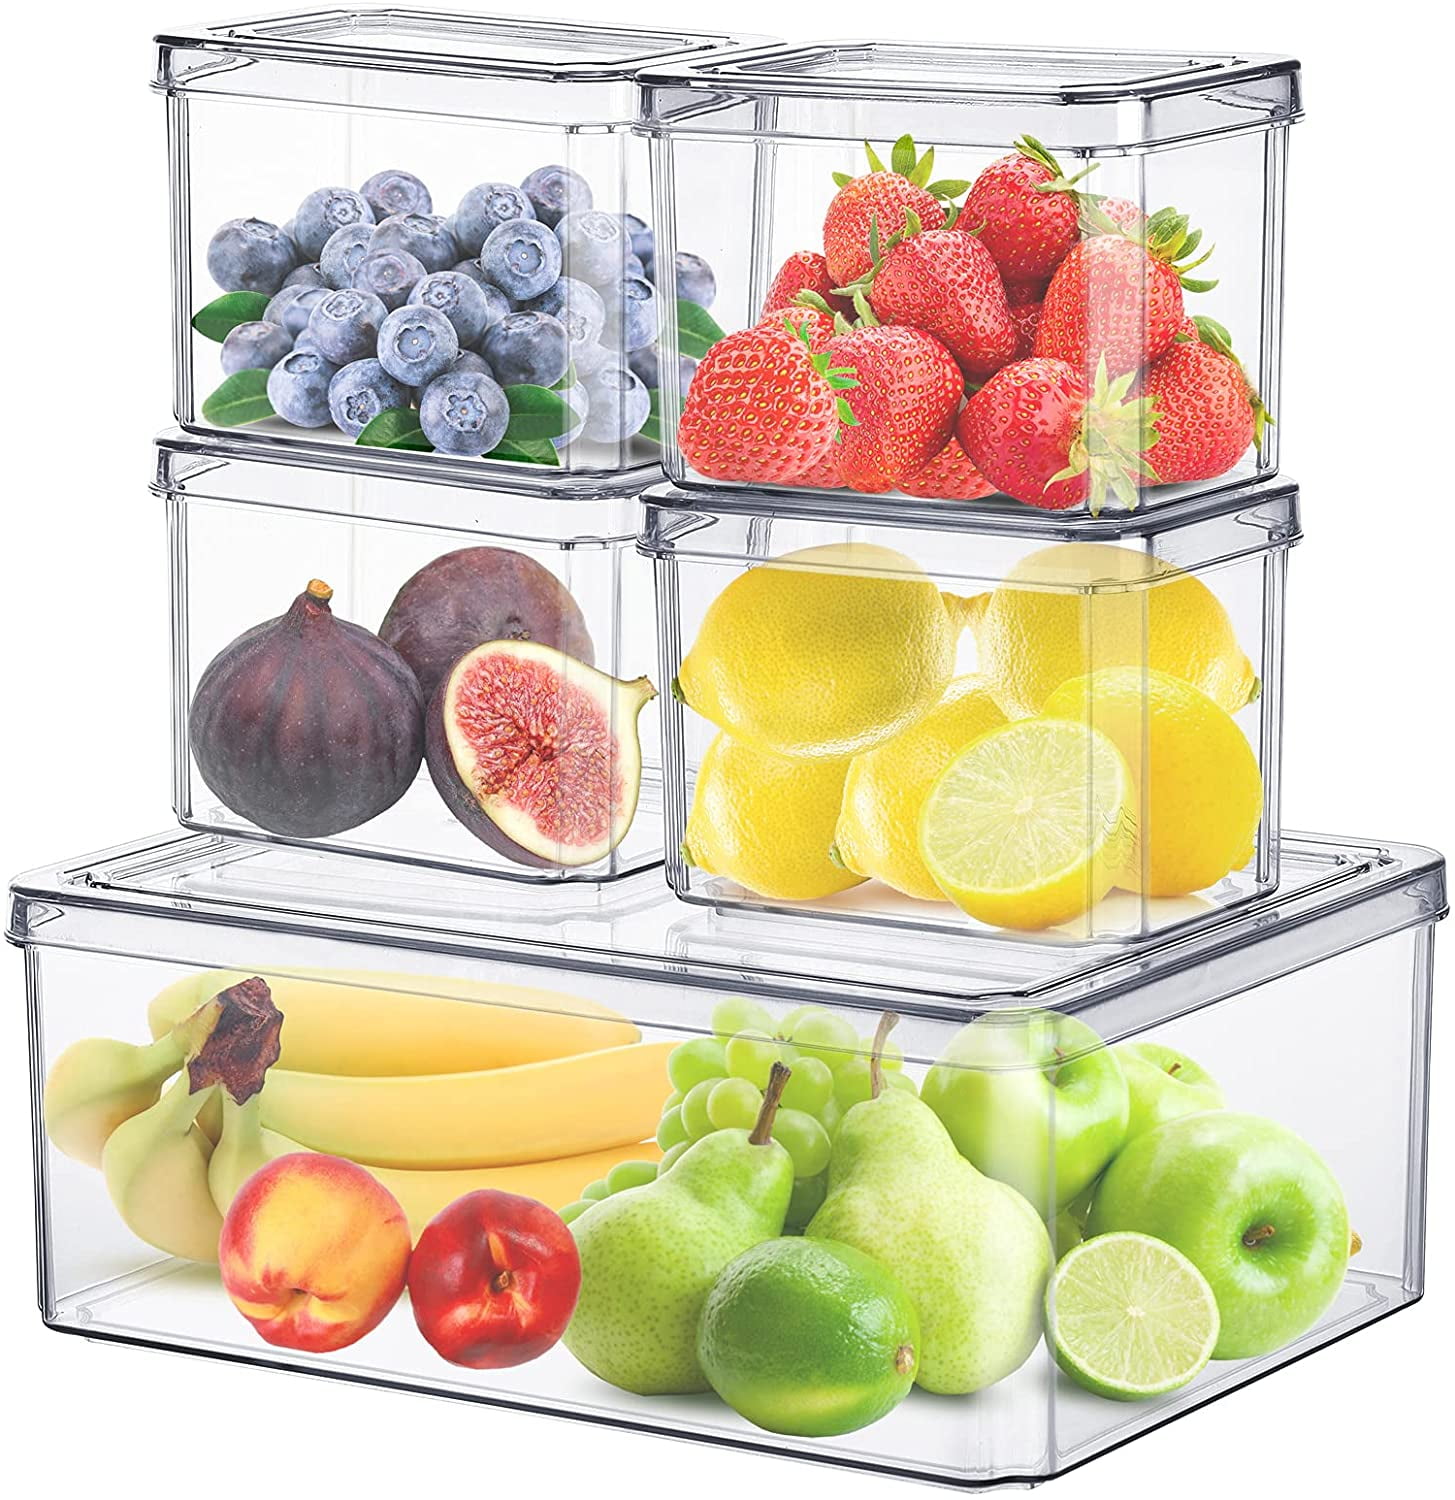 Portable Travel Charcuterie Board with Lid, Refrigerator Food Storage Box, Divided Storage Containers, Chopped Salad Box, for Fruit, Nuts, Spice